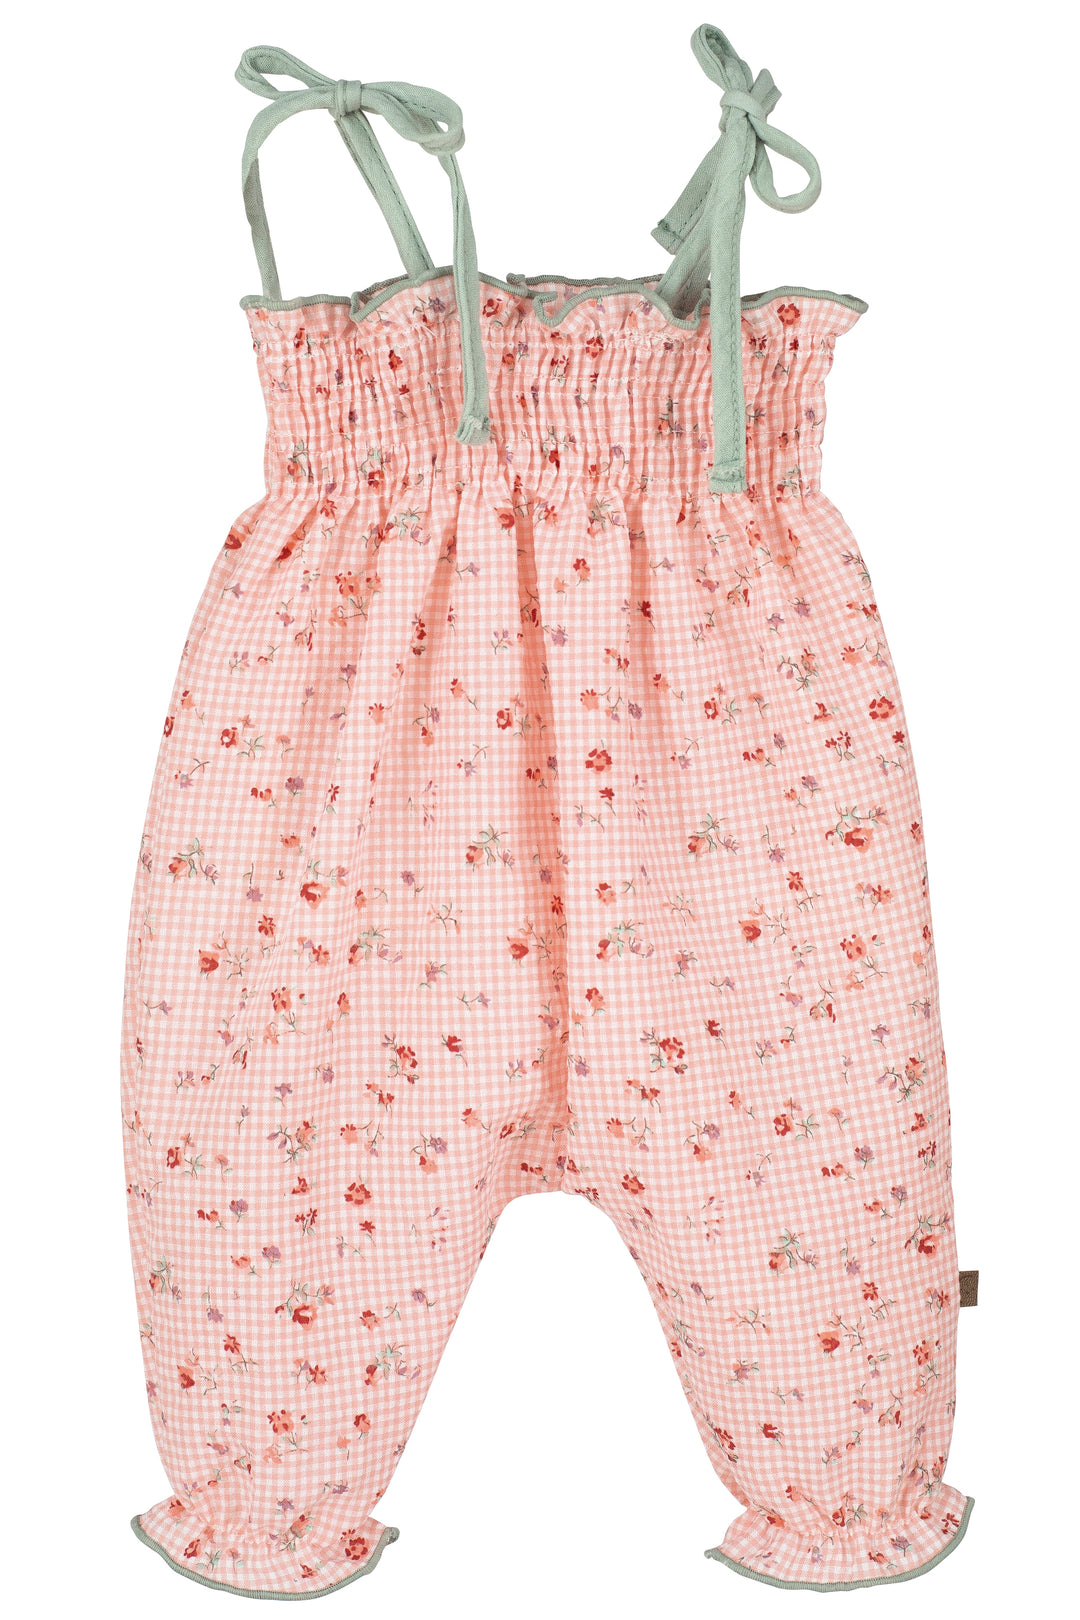 Calamaro PREORDER "Layla" Coral Gingham Floral Jumpsuit | Millie and John